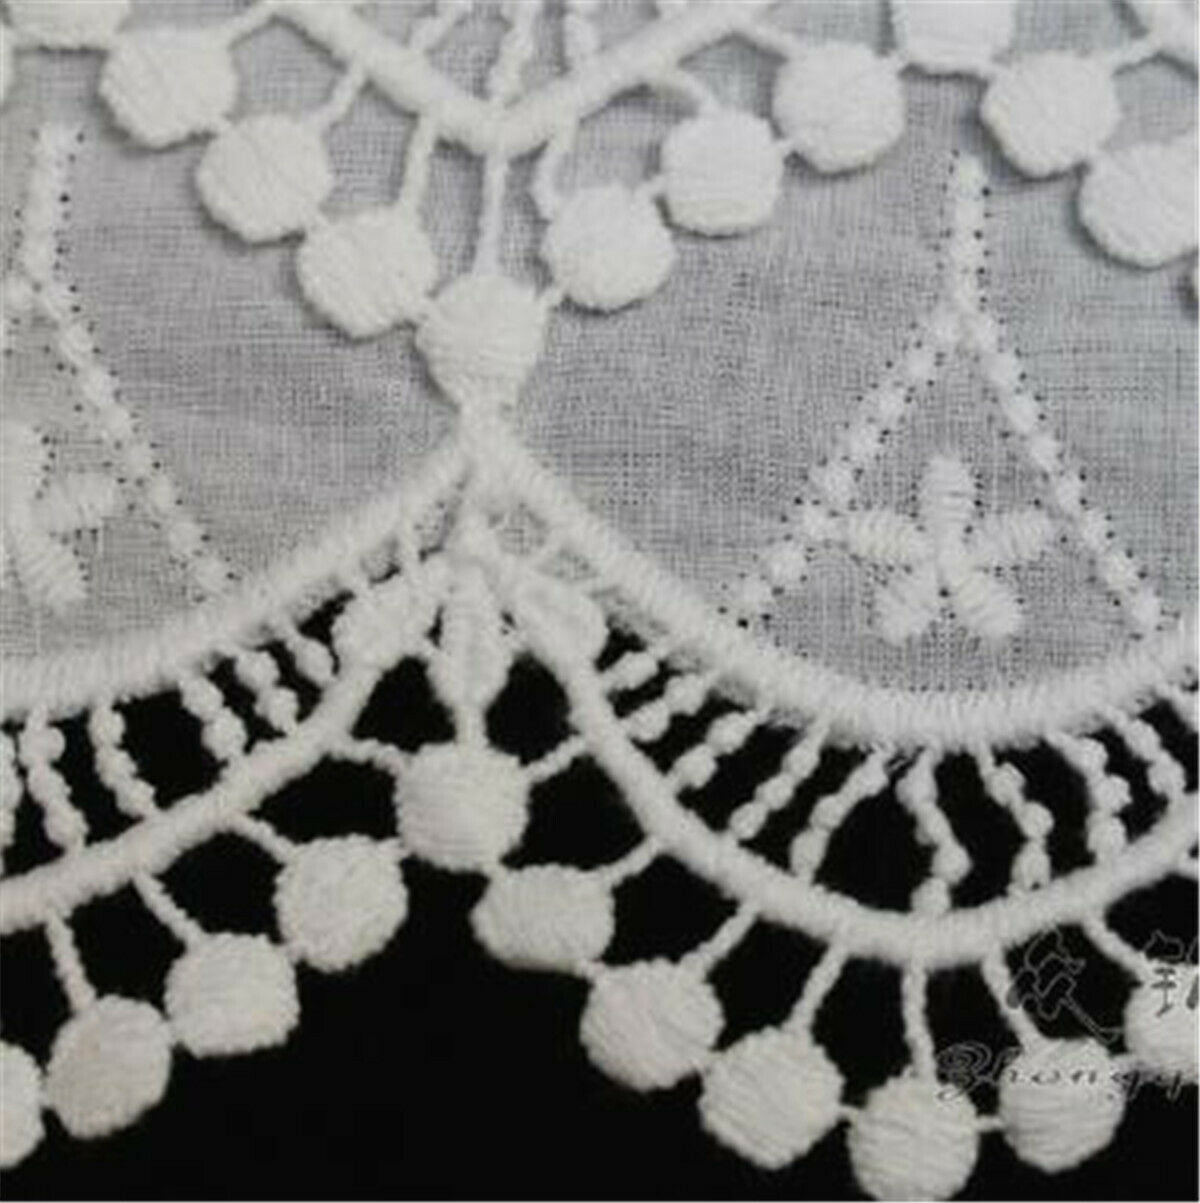 1 Yd Embroidery Floral White Cotton Lace Trim Ribbon Wedding Fabric Sewing Craft